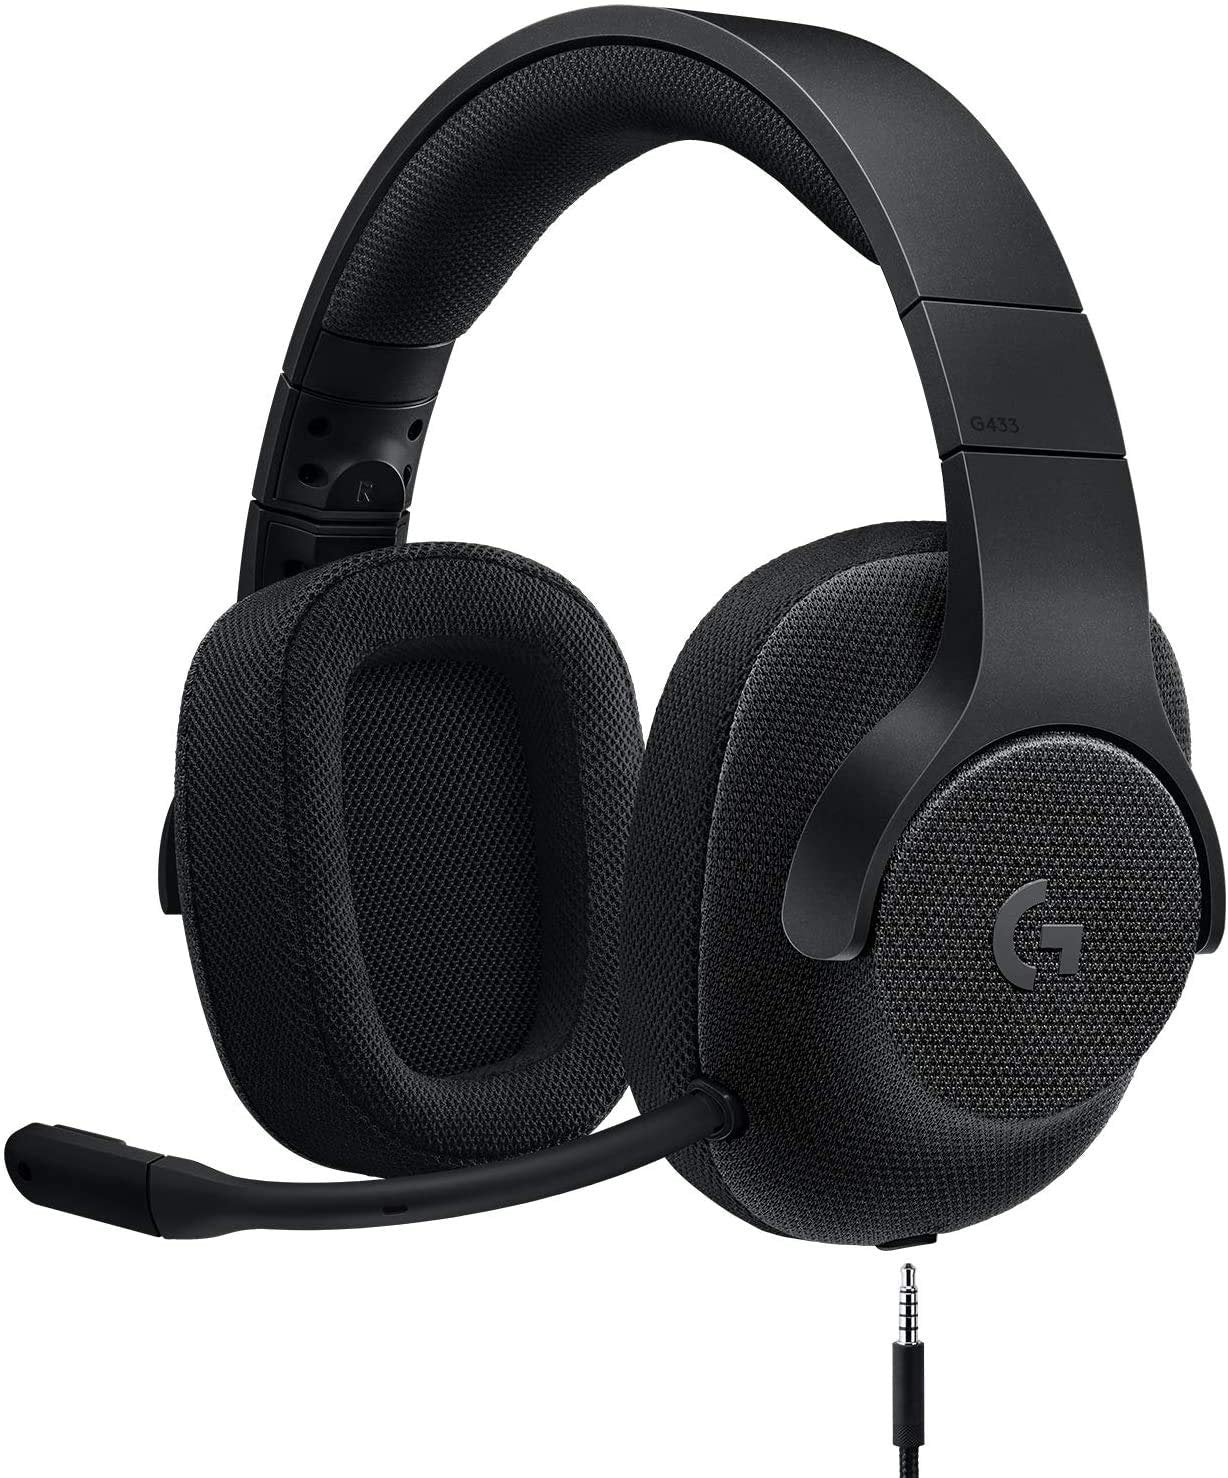 Logitech (Renewed) G433 7.1 Wired Gaming Headset with DTS Headphone - Black